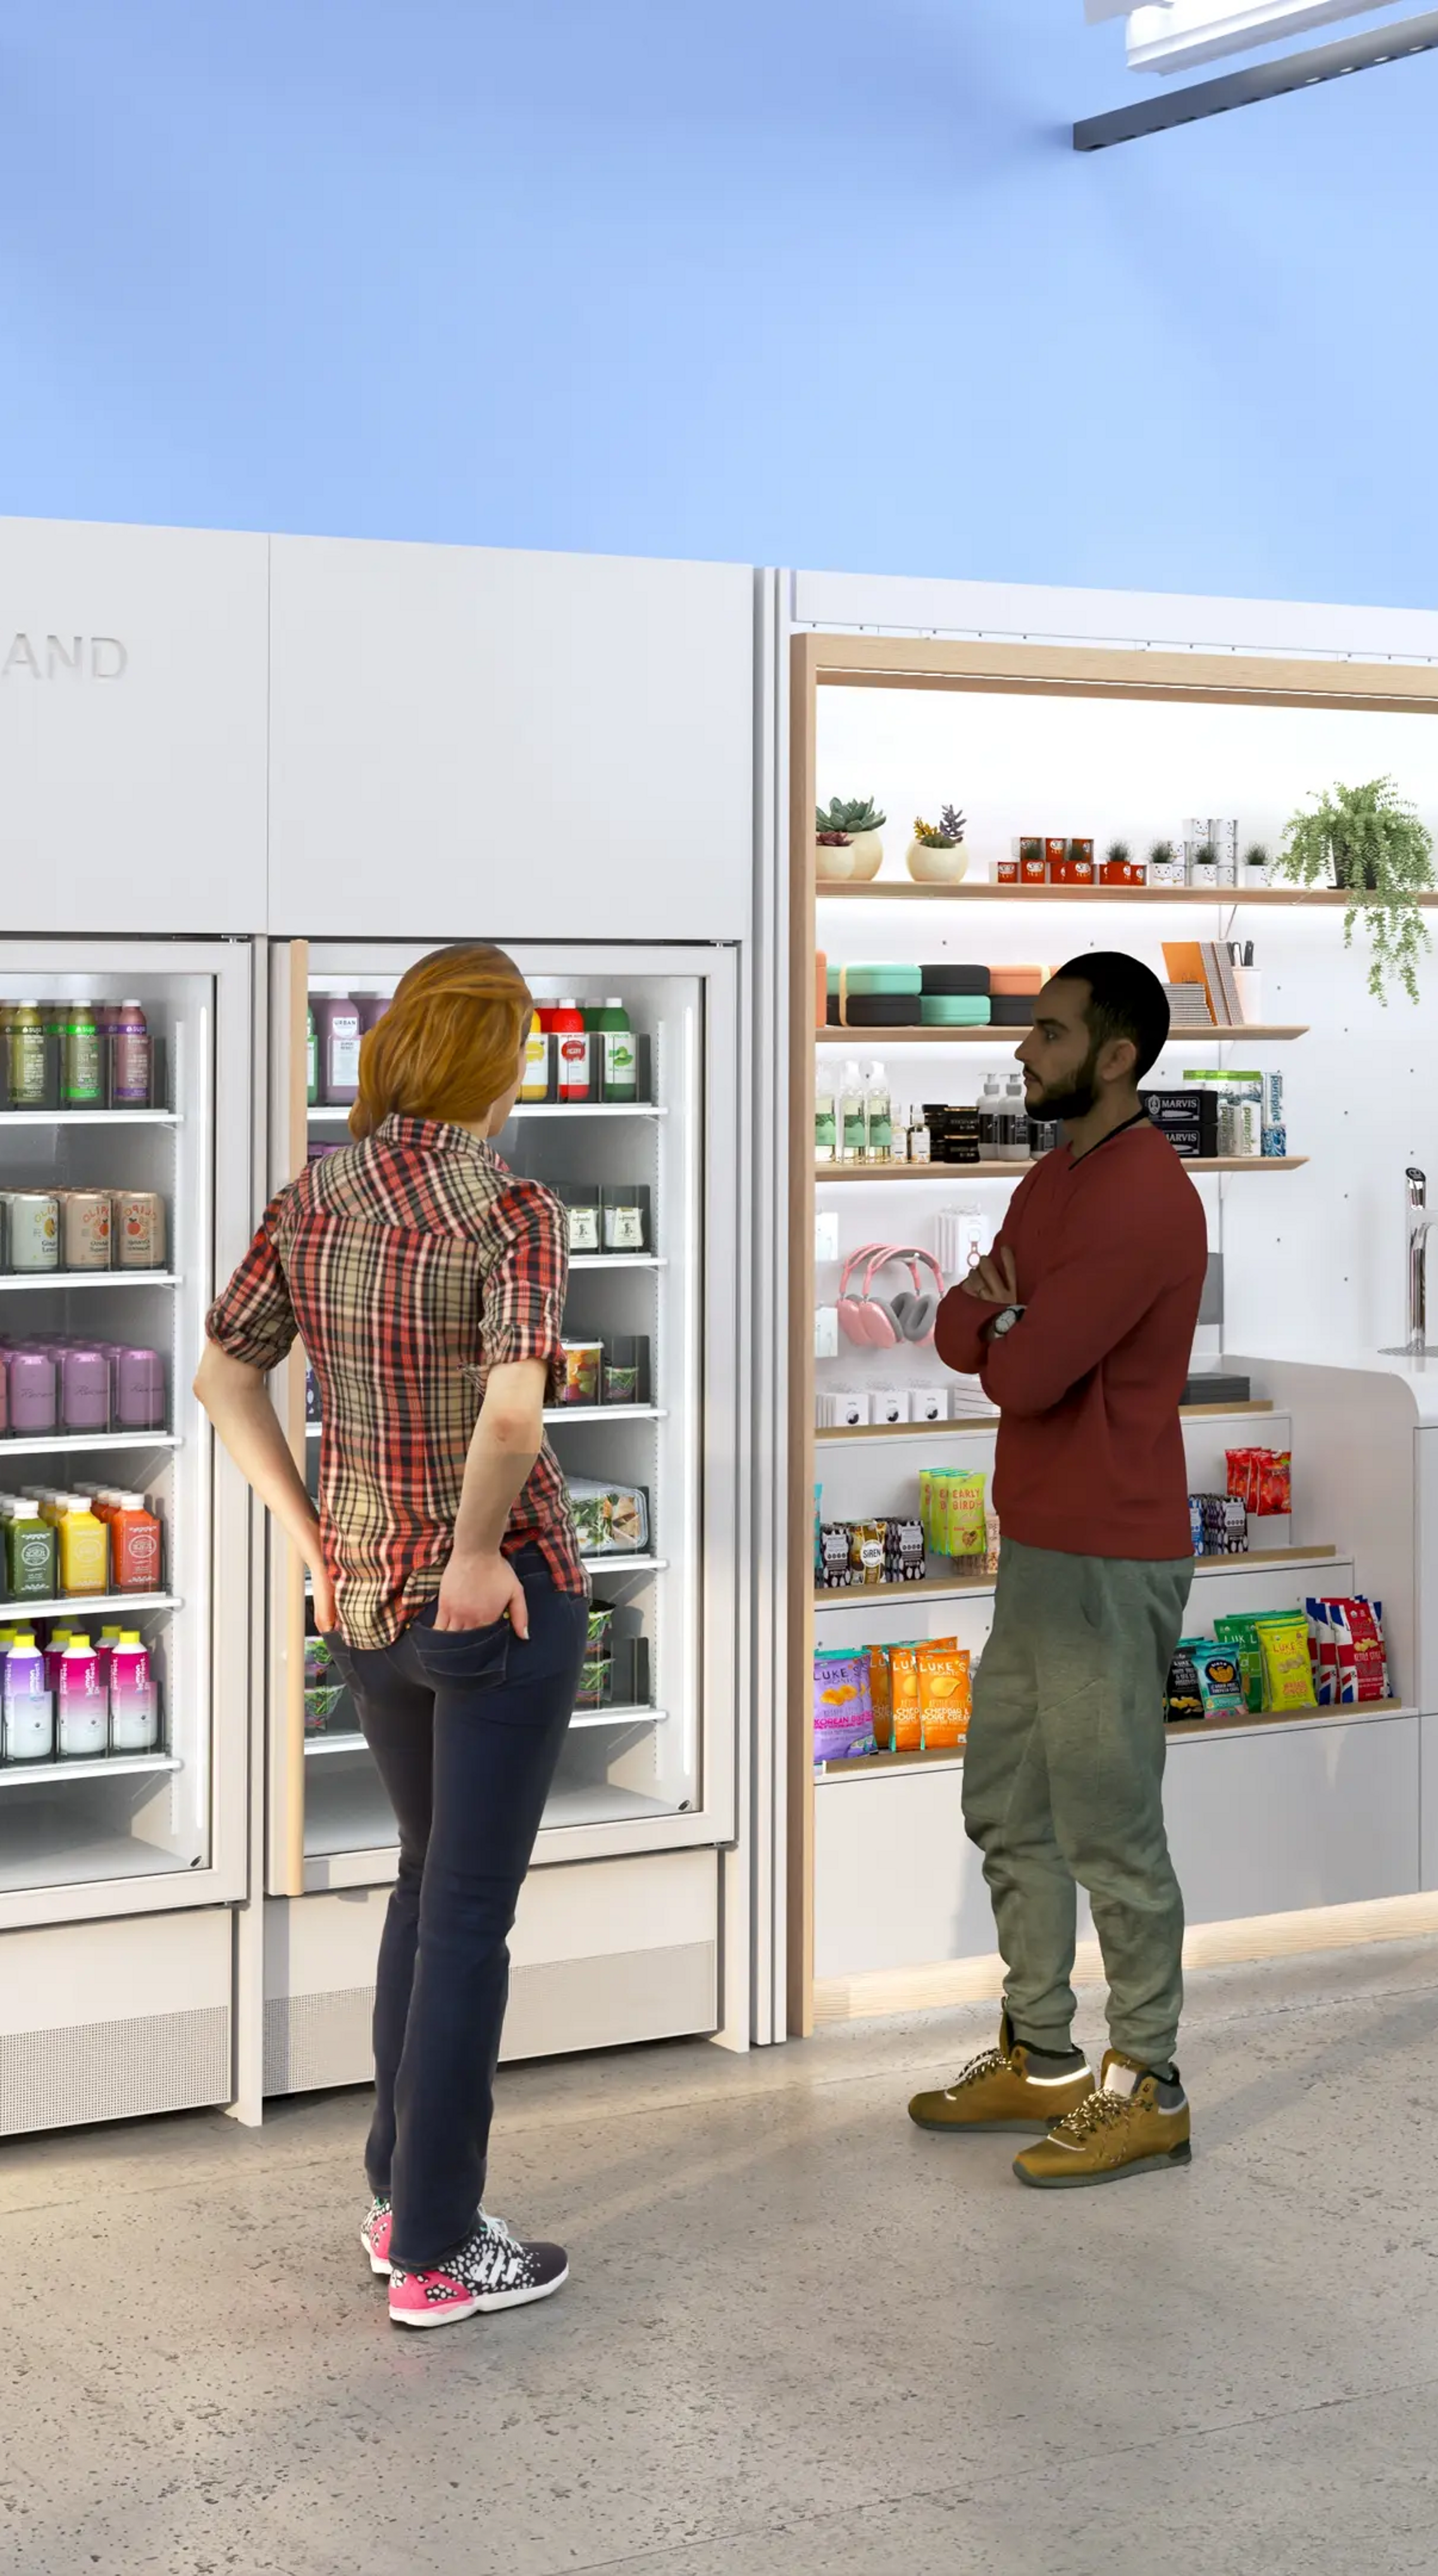 Employees gathering around New Stand display case